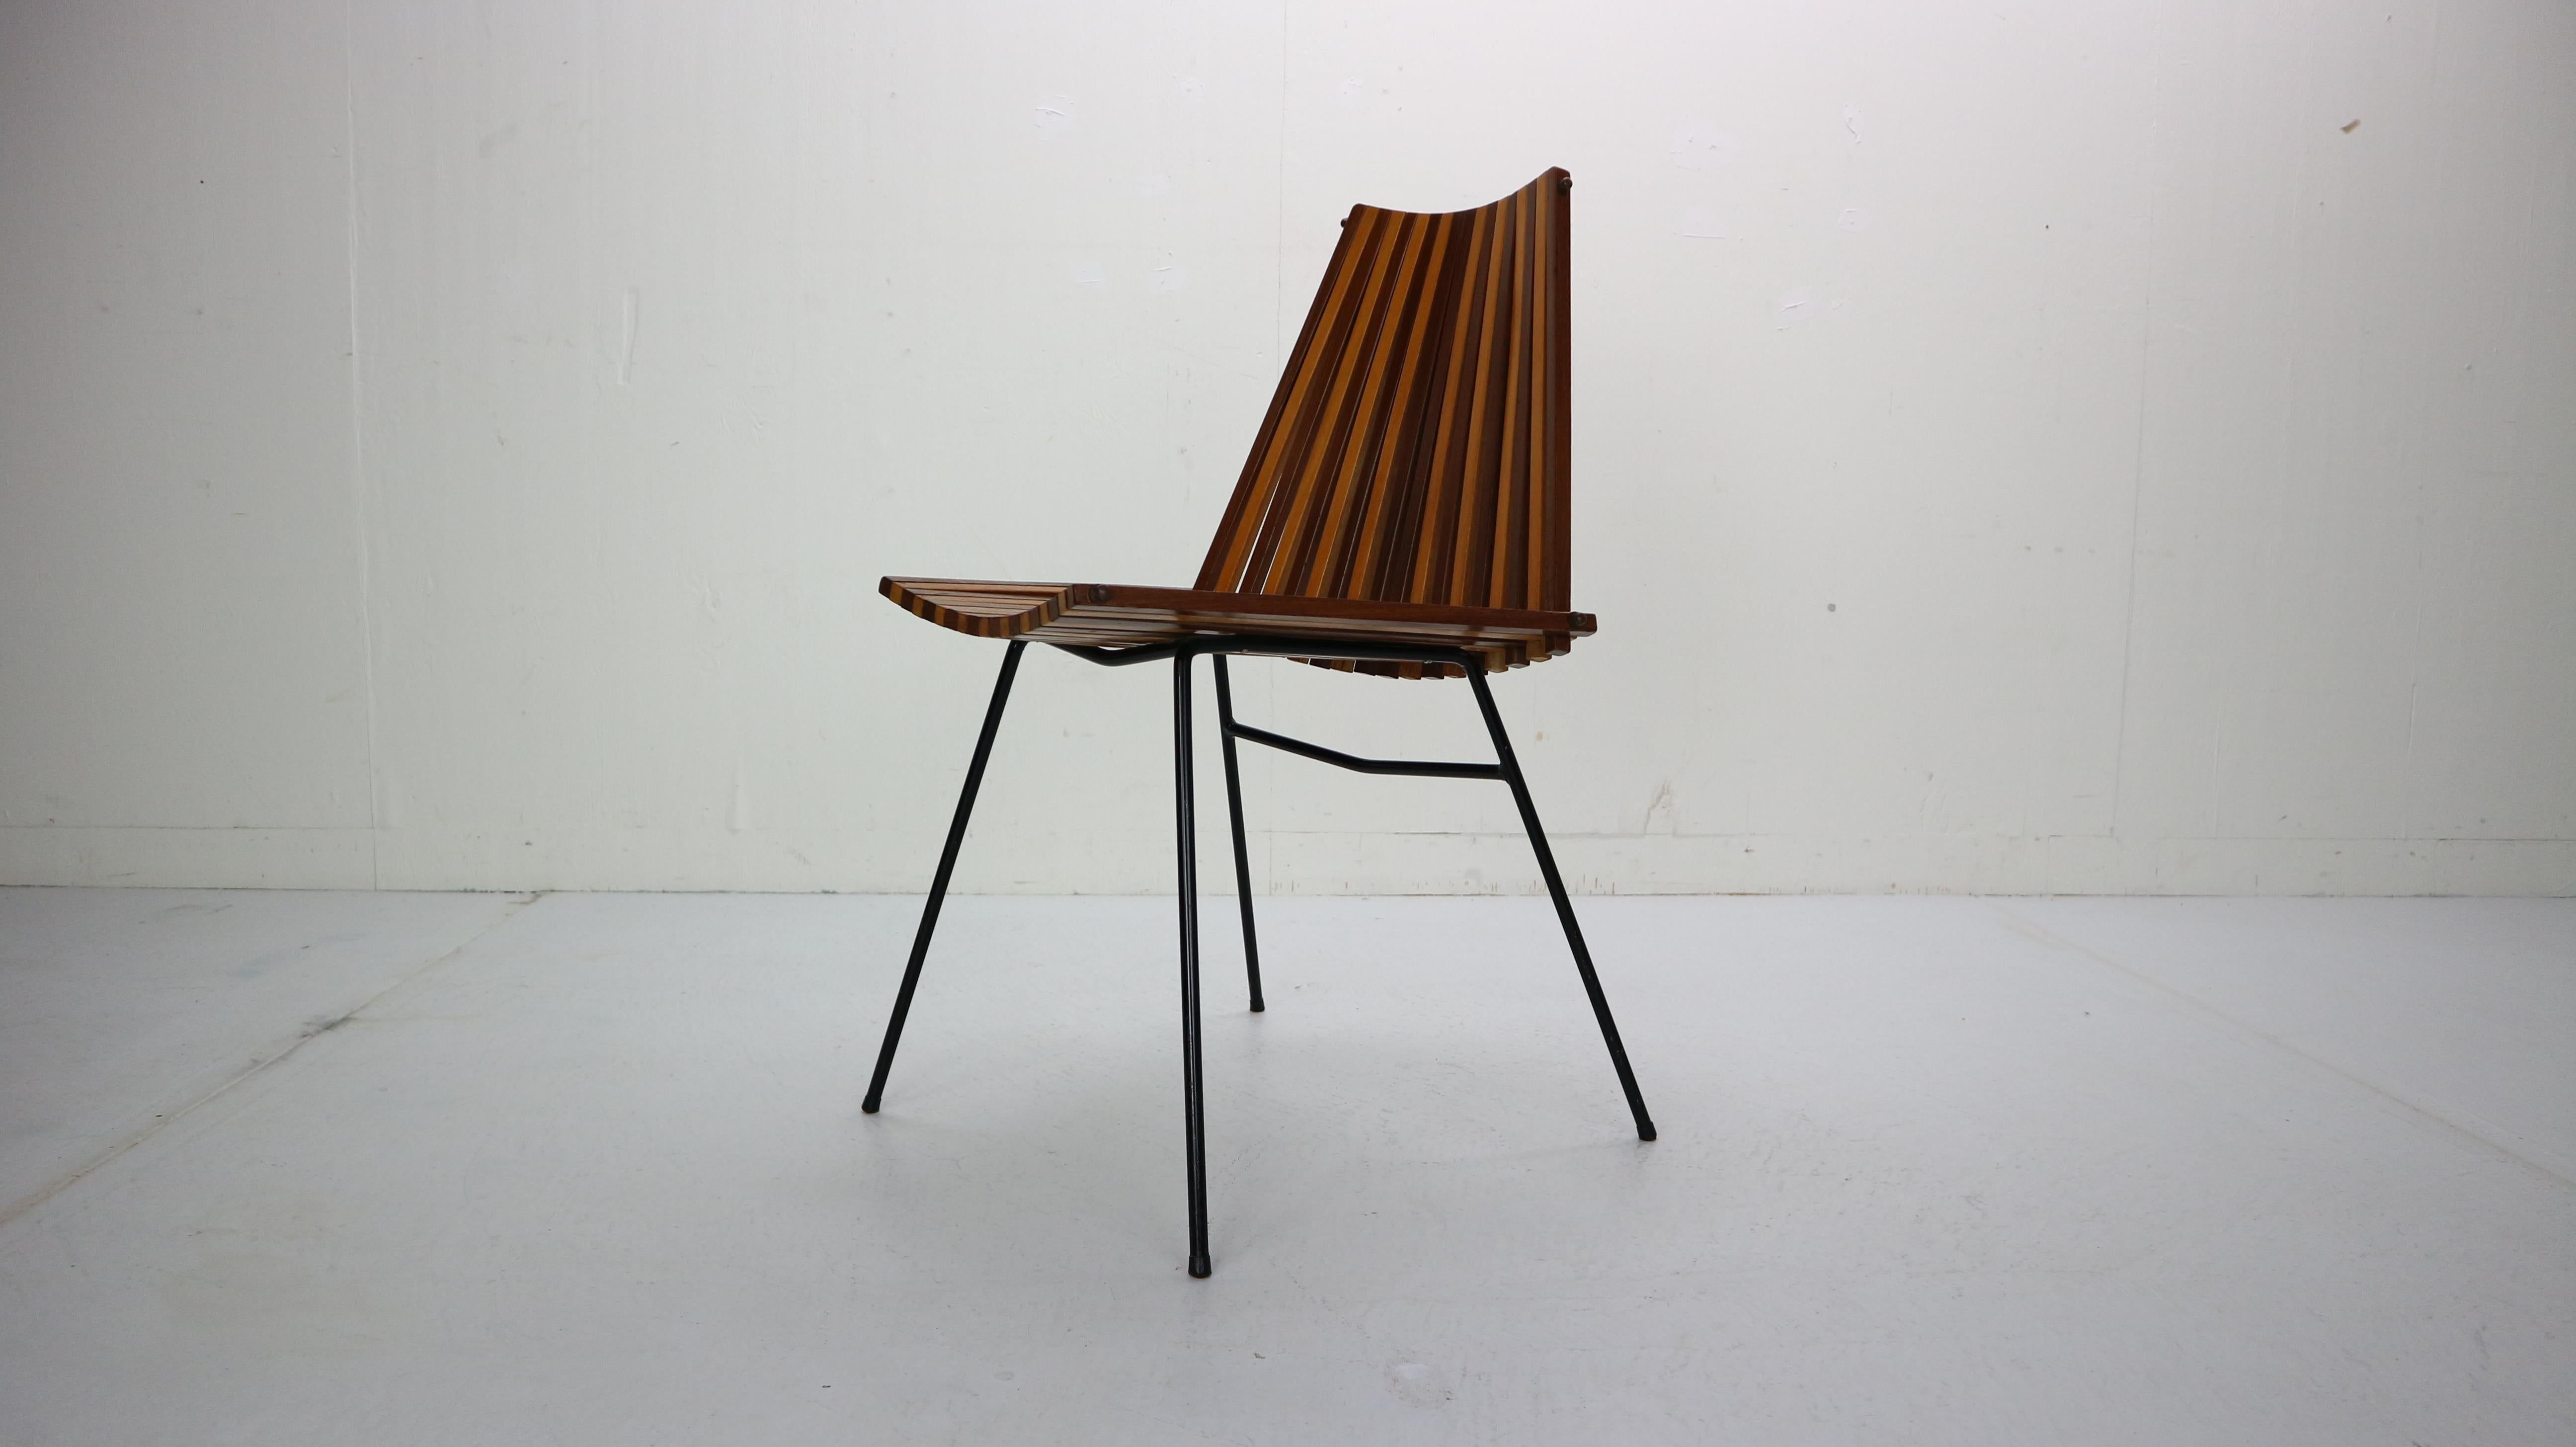 Elegant and special beautiful modernist chair, designed by Dirk van Sliedregt and made by Rohé Noordwolde in 1960s Netherlands.

This chair is made of steel rods with a back and seat, consists of 37 wooden slats in total. The slats are made of